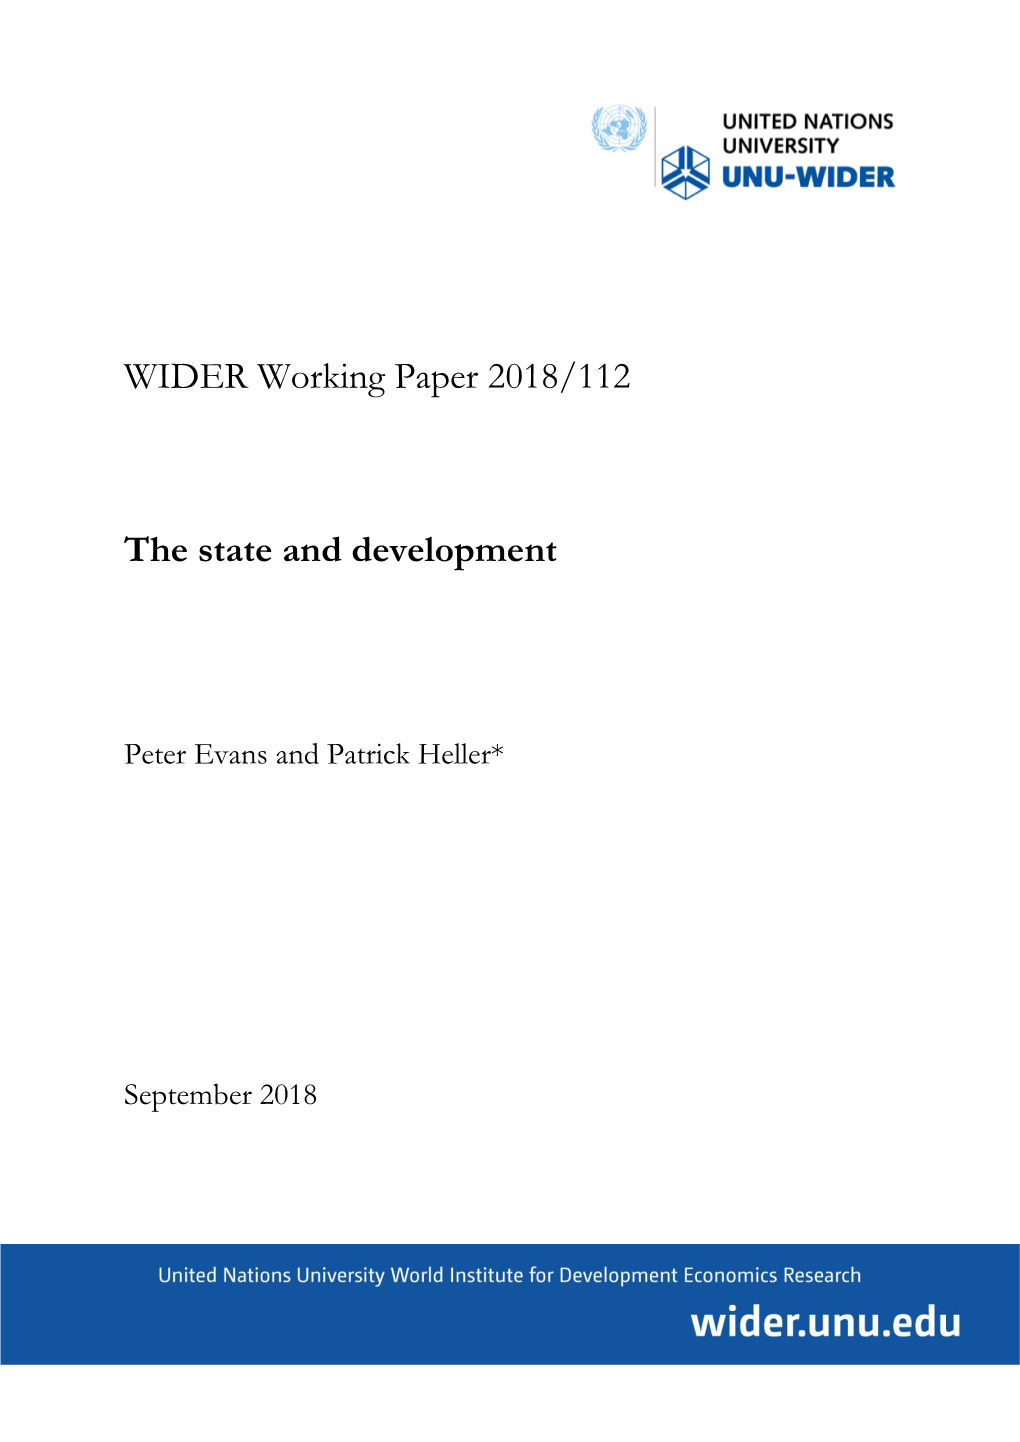 The State and Development